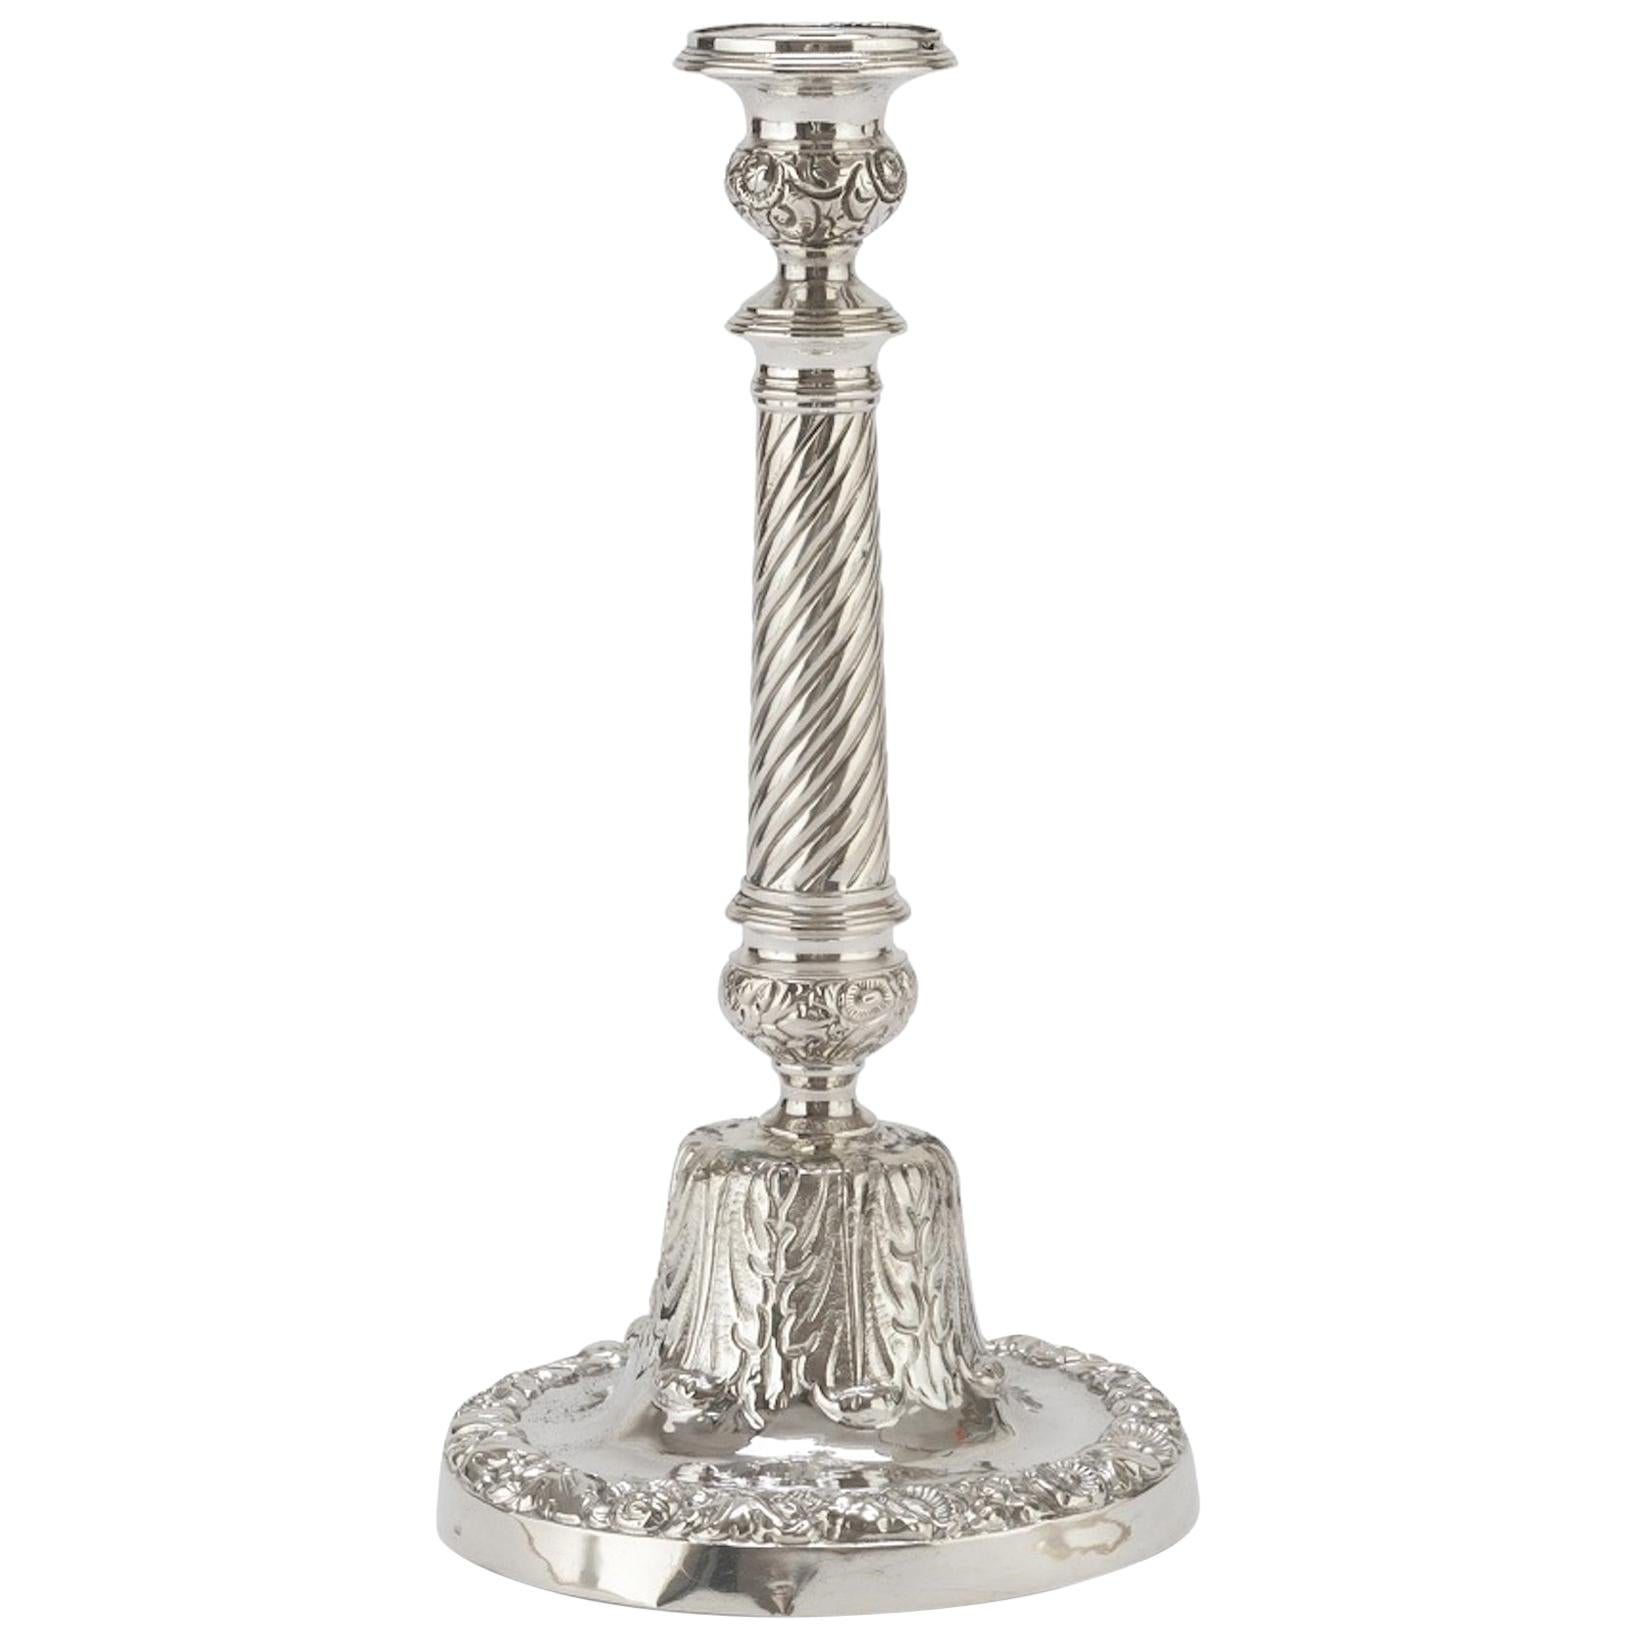 Ancient Silver Candelabra, Italian Production, End of 19th Century